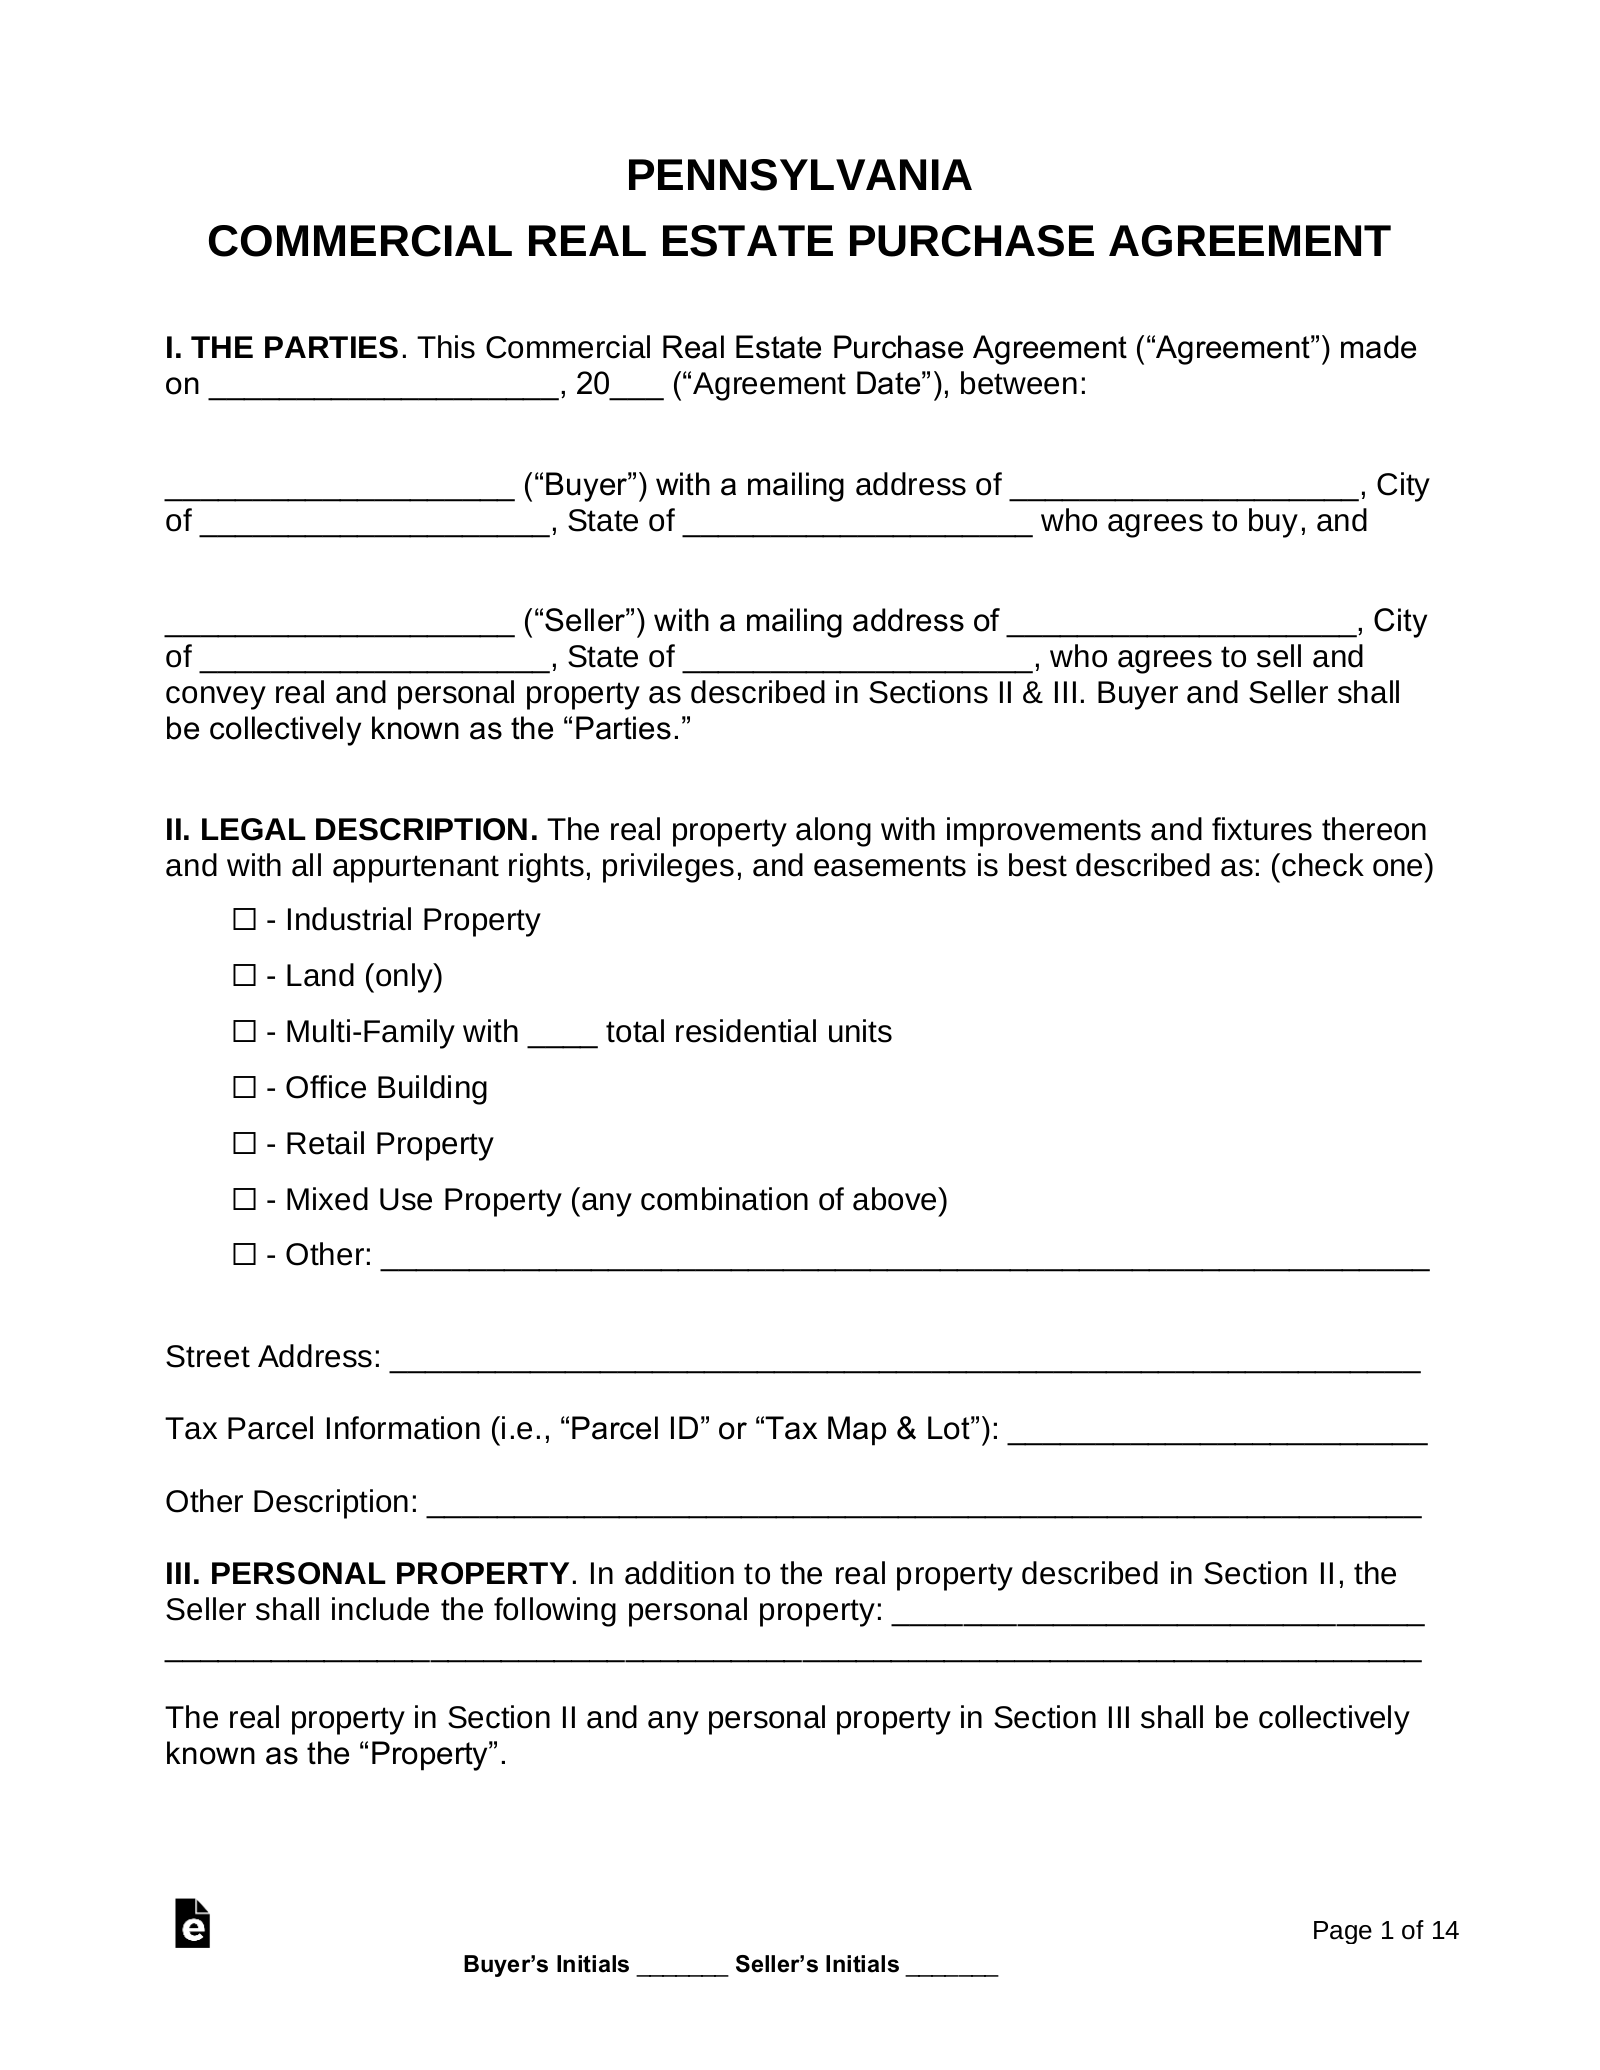 Pennsylvania Commercial Real Estate Purchase and Sale Agreement